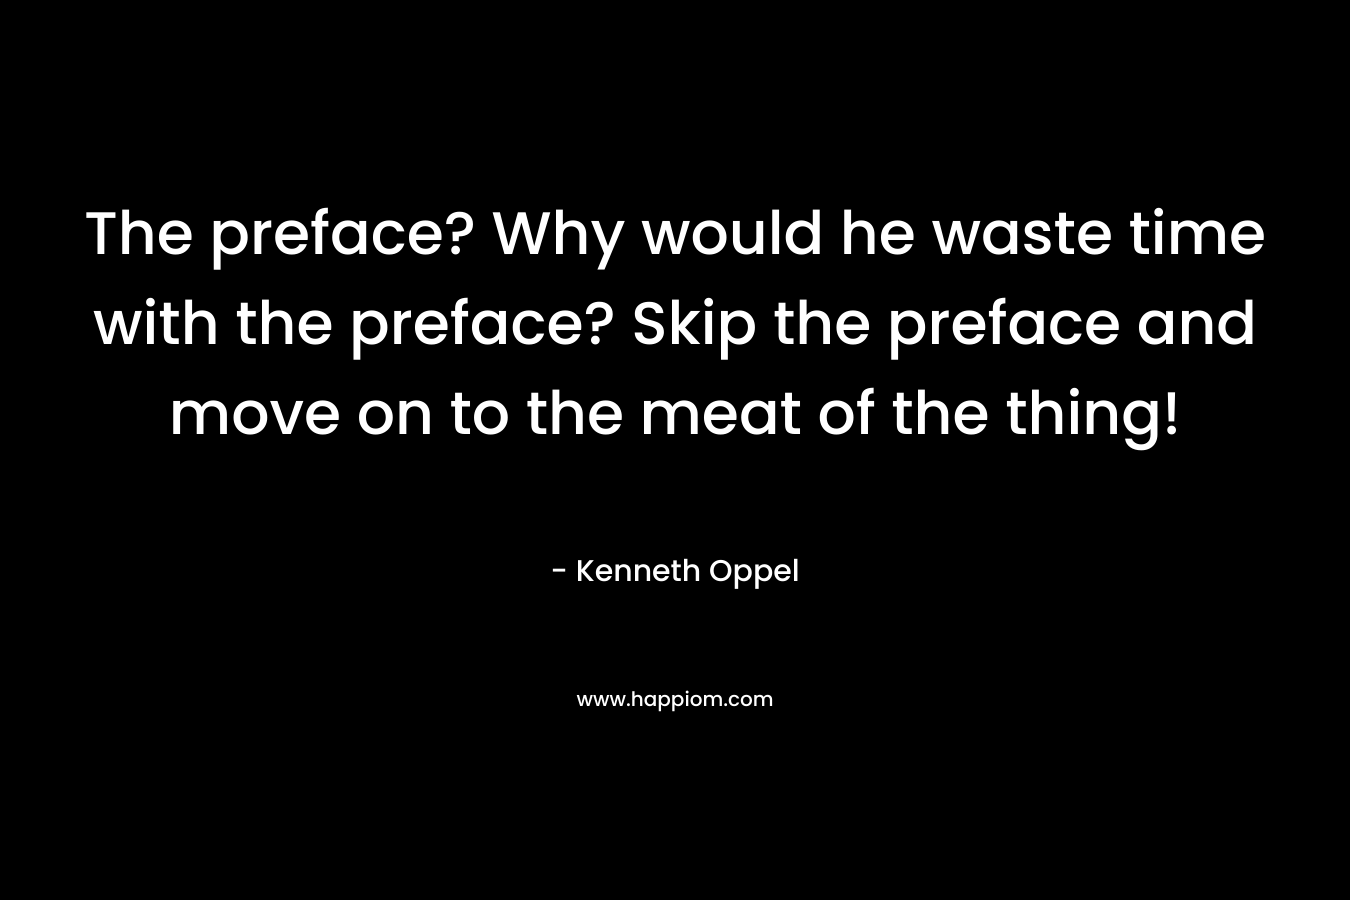 The preface? Why would he waste time with the preface? Skip the preface and move on to the meat of the thing! – Kenneth Oppel